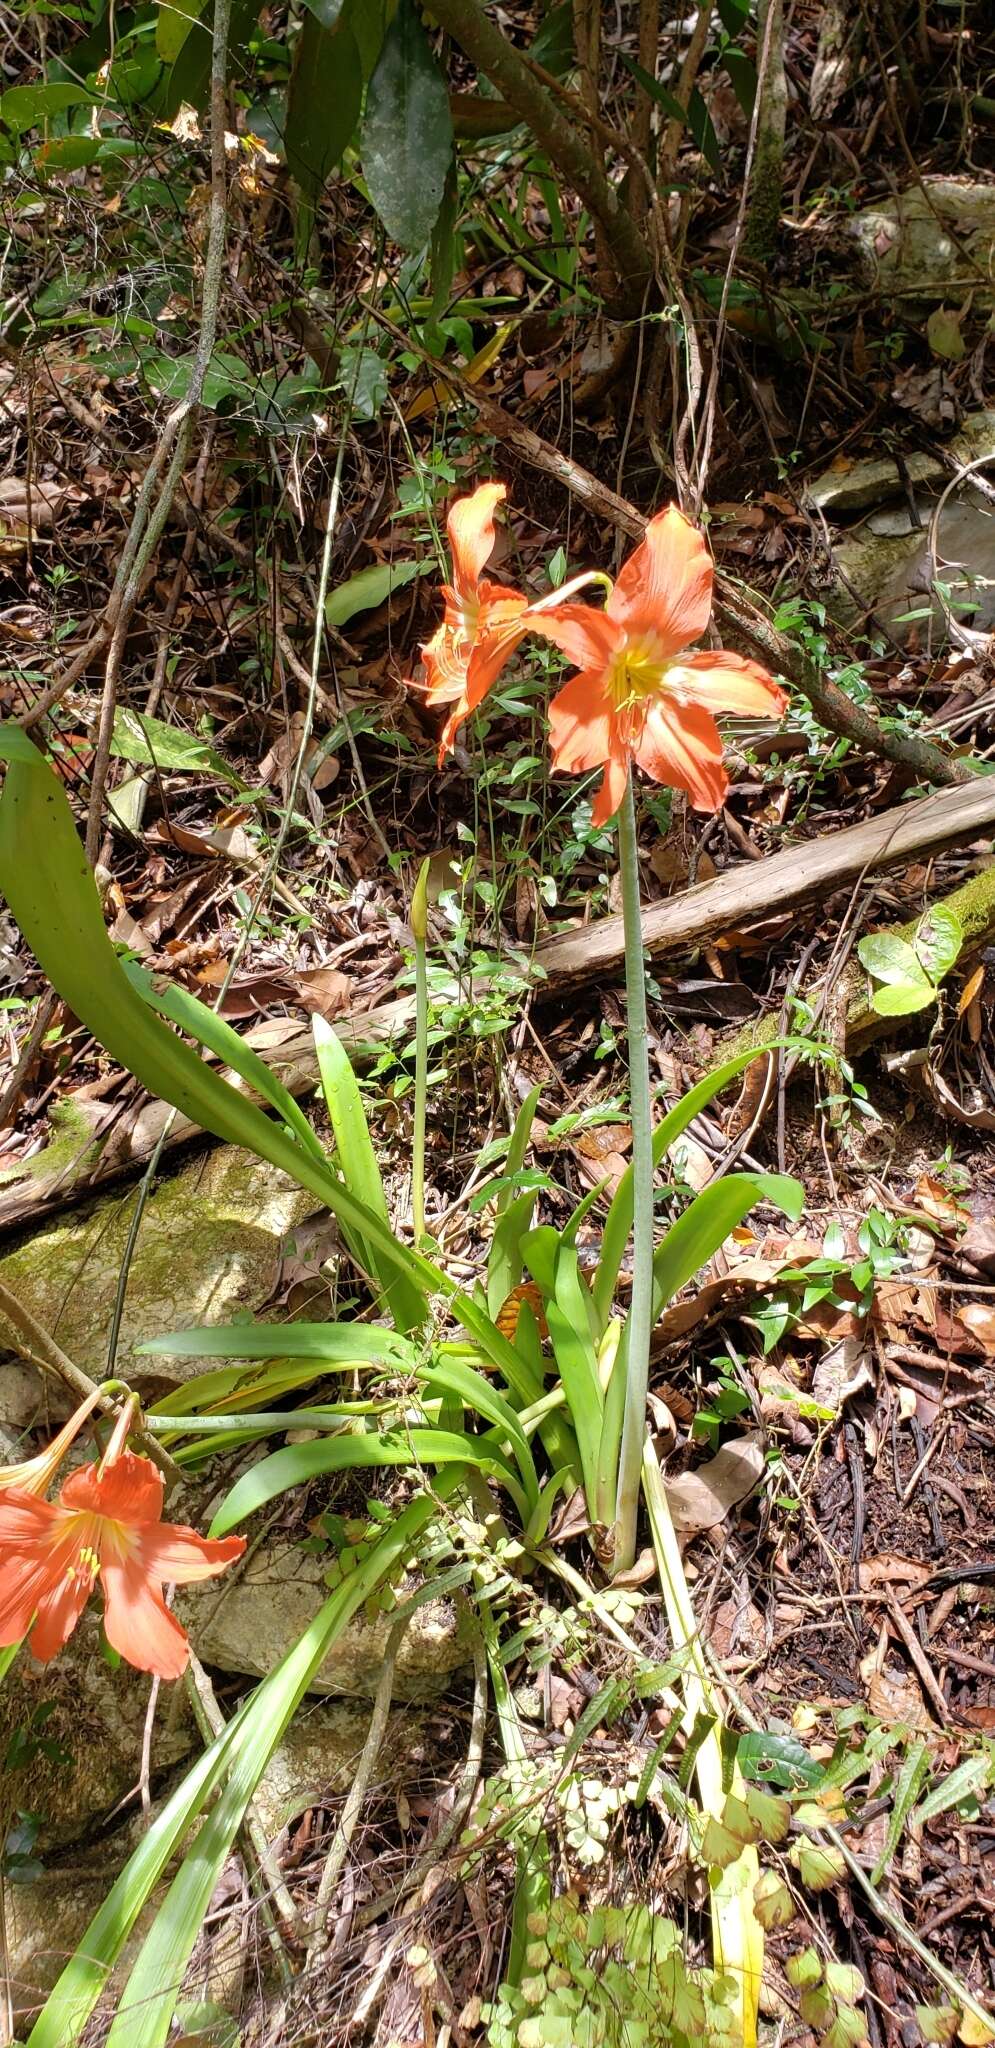 Image of Barbados lily